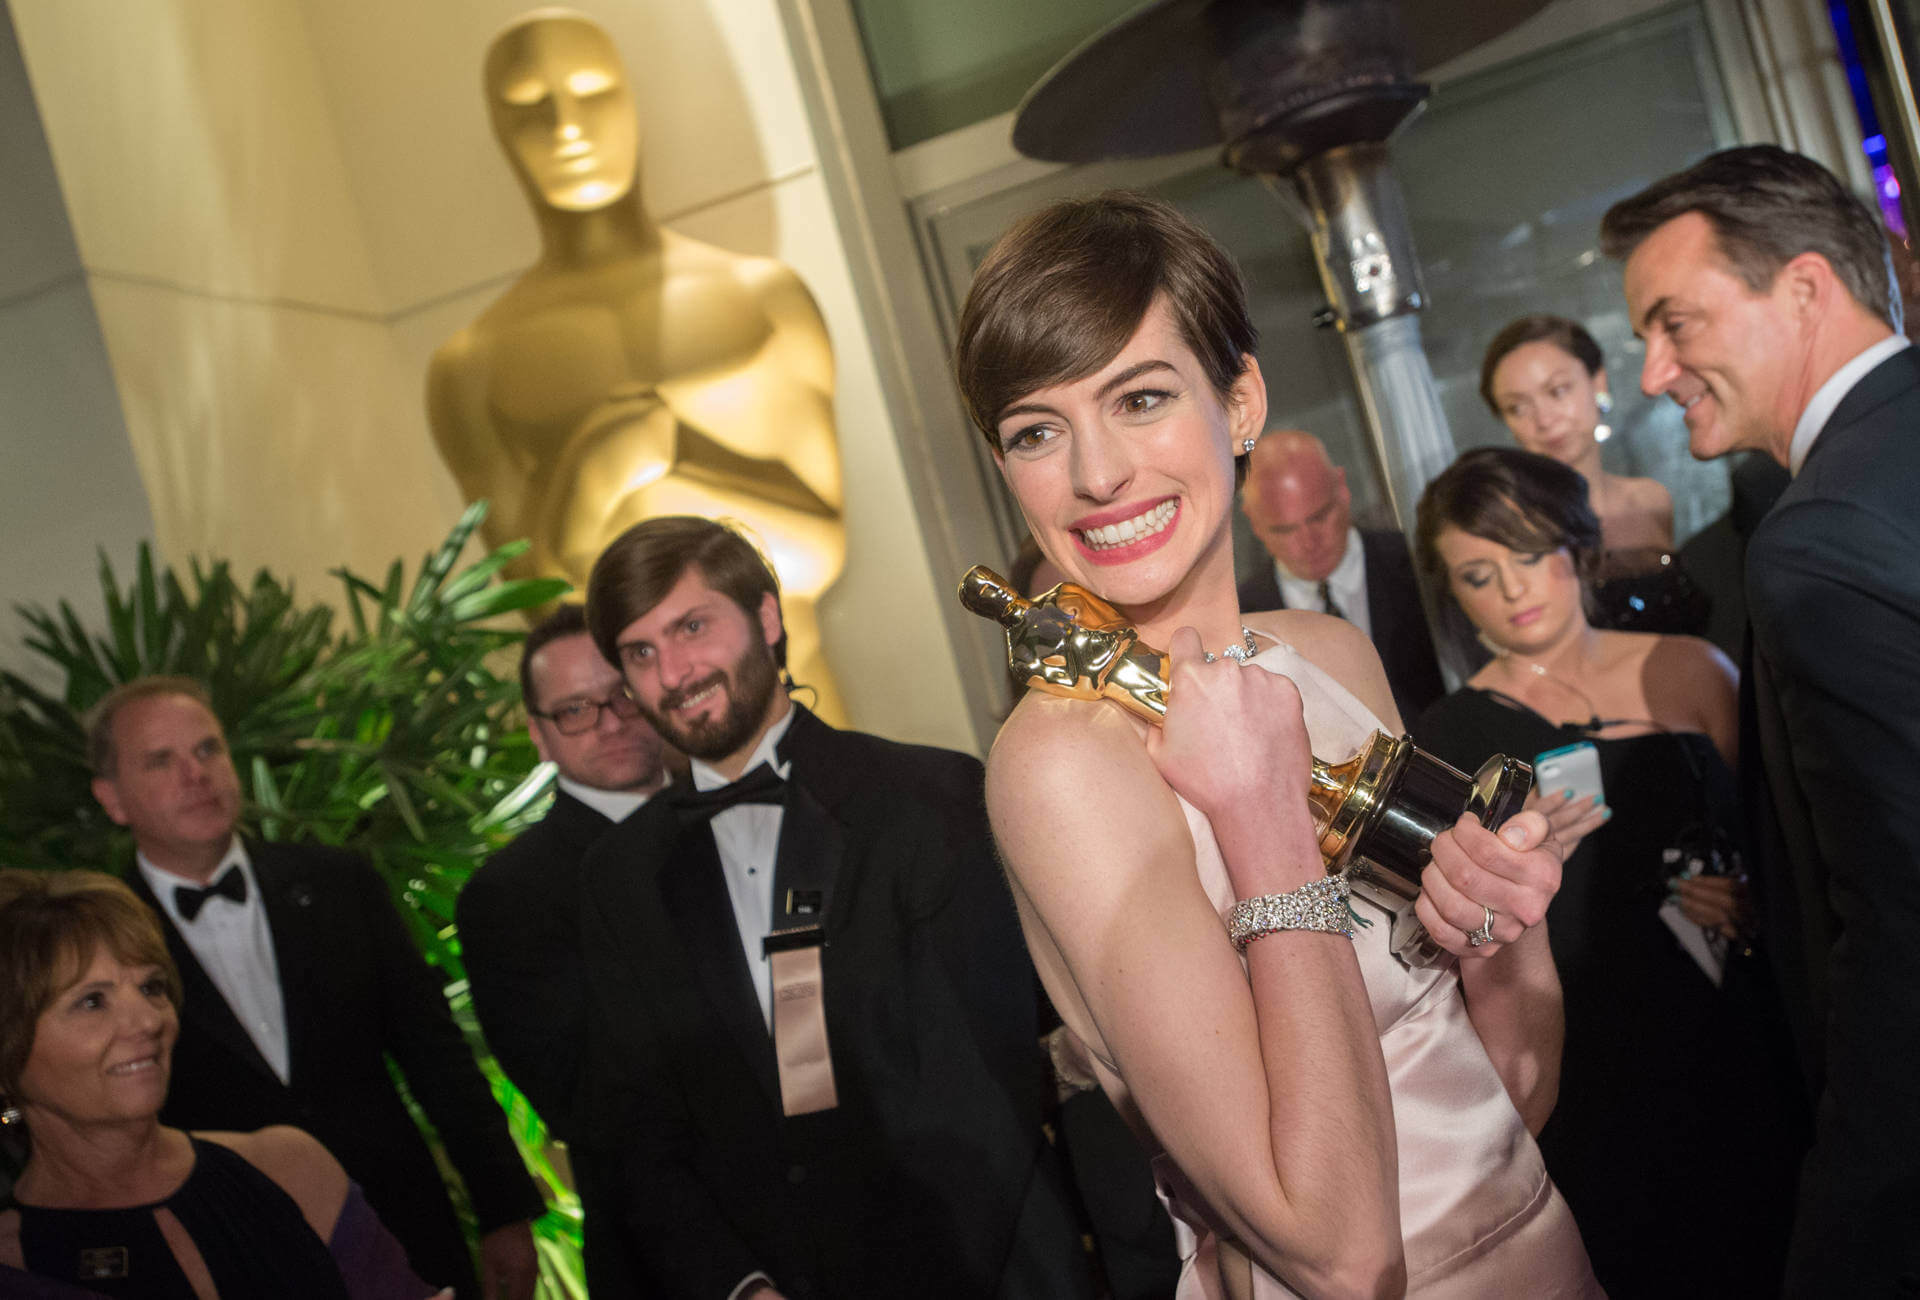 Anne Hathaway: “It's impossible not to 